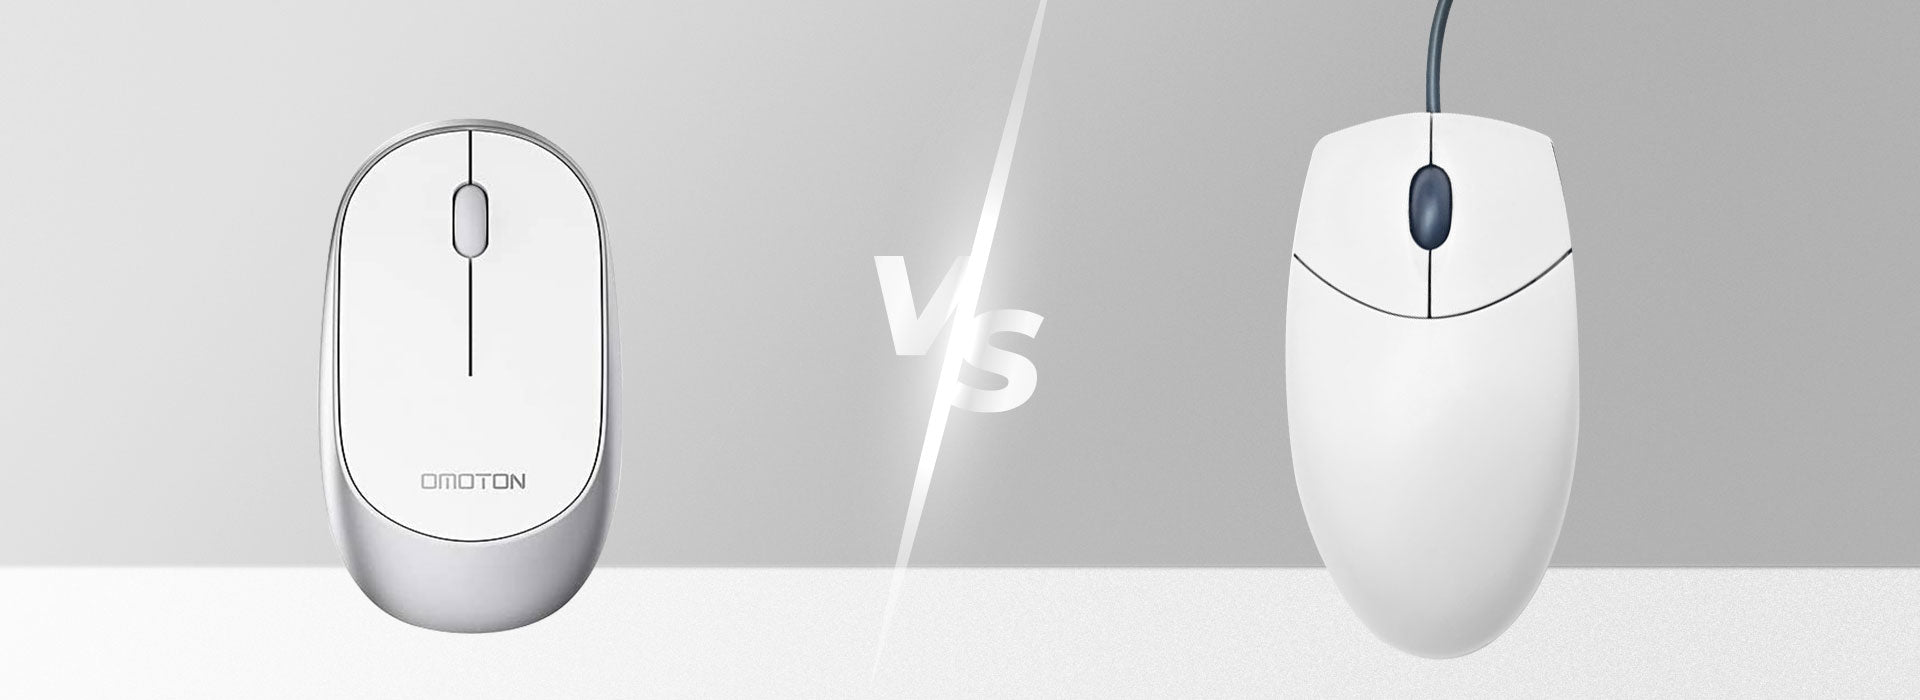 Wireless Mouse vs. Wired: Which Is Better?